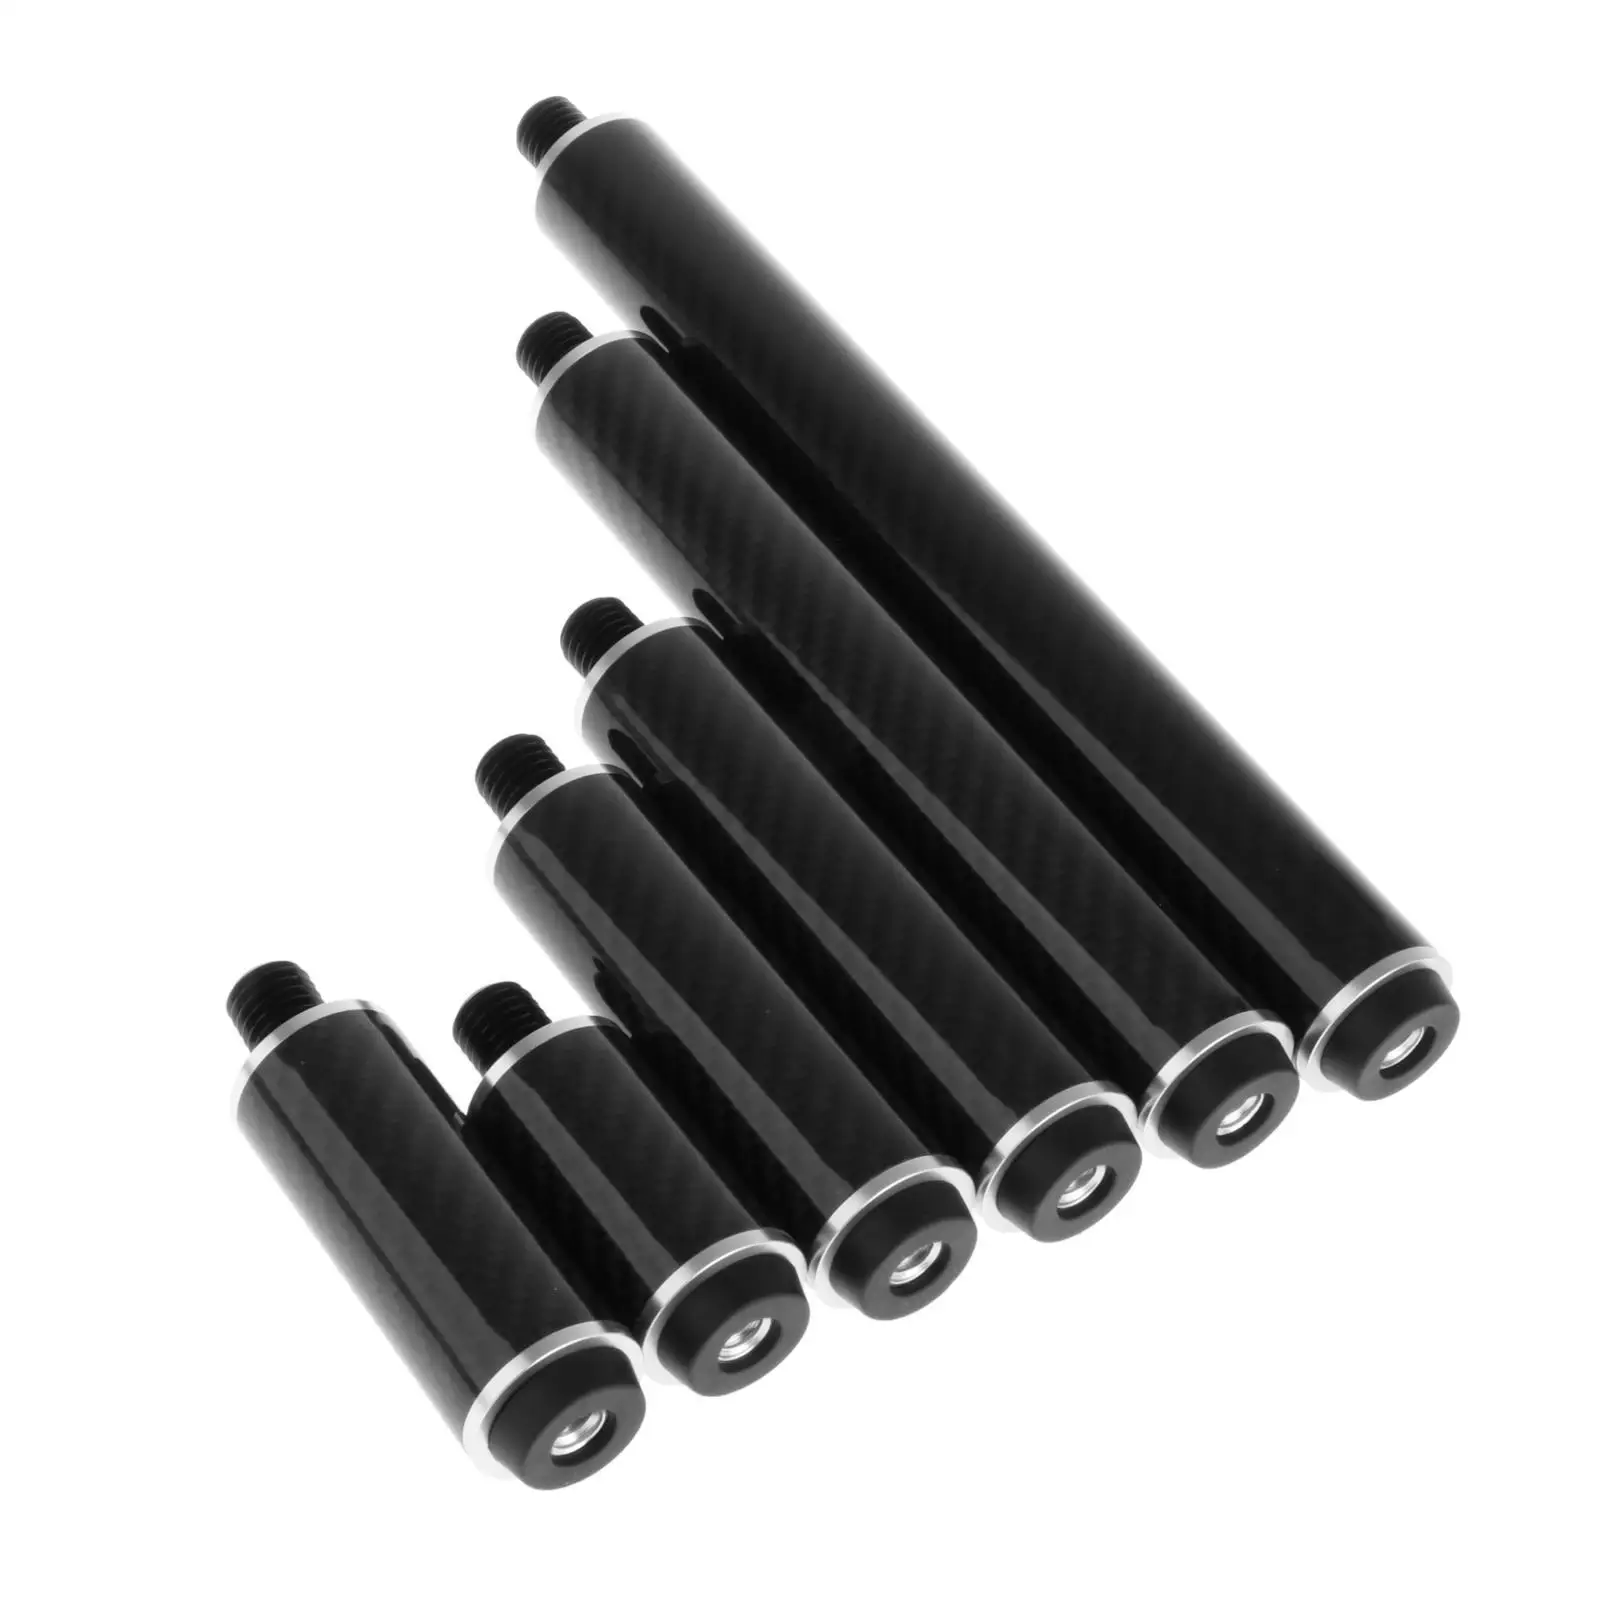 Cue End Extender Adapter Portable Cue End Lengthener Billiards Pool Cue Extension Snooker Cue Stick for Player Games Lovers